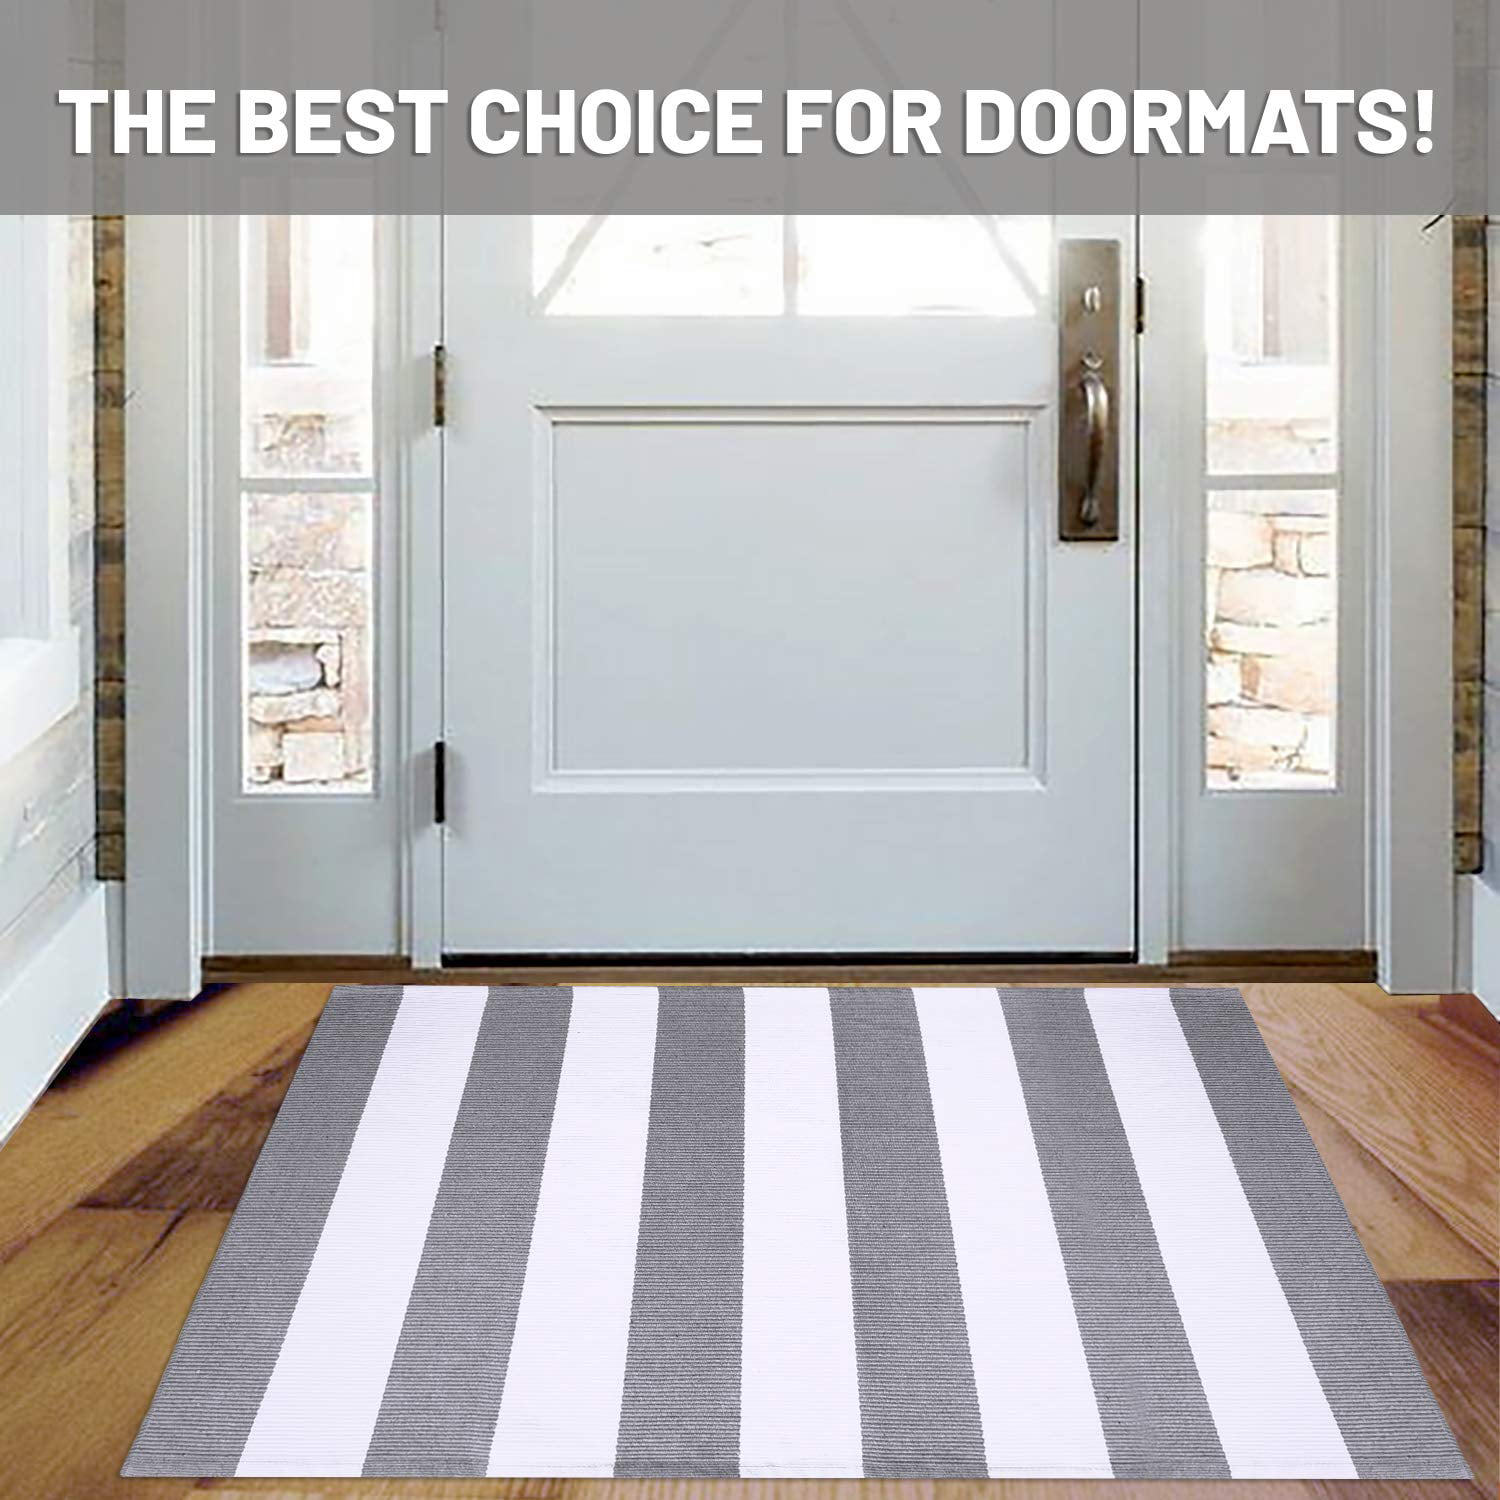 Bottalive Black and White Striped Area Rug 275 x 43 Front Porch Rug Cotton Hand-Woven Outdoor Rug for Layered Door Matsfarmhouseentry Waywelcome Door